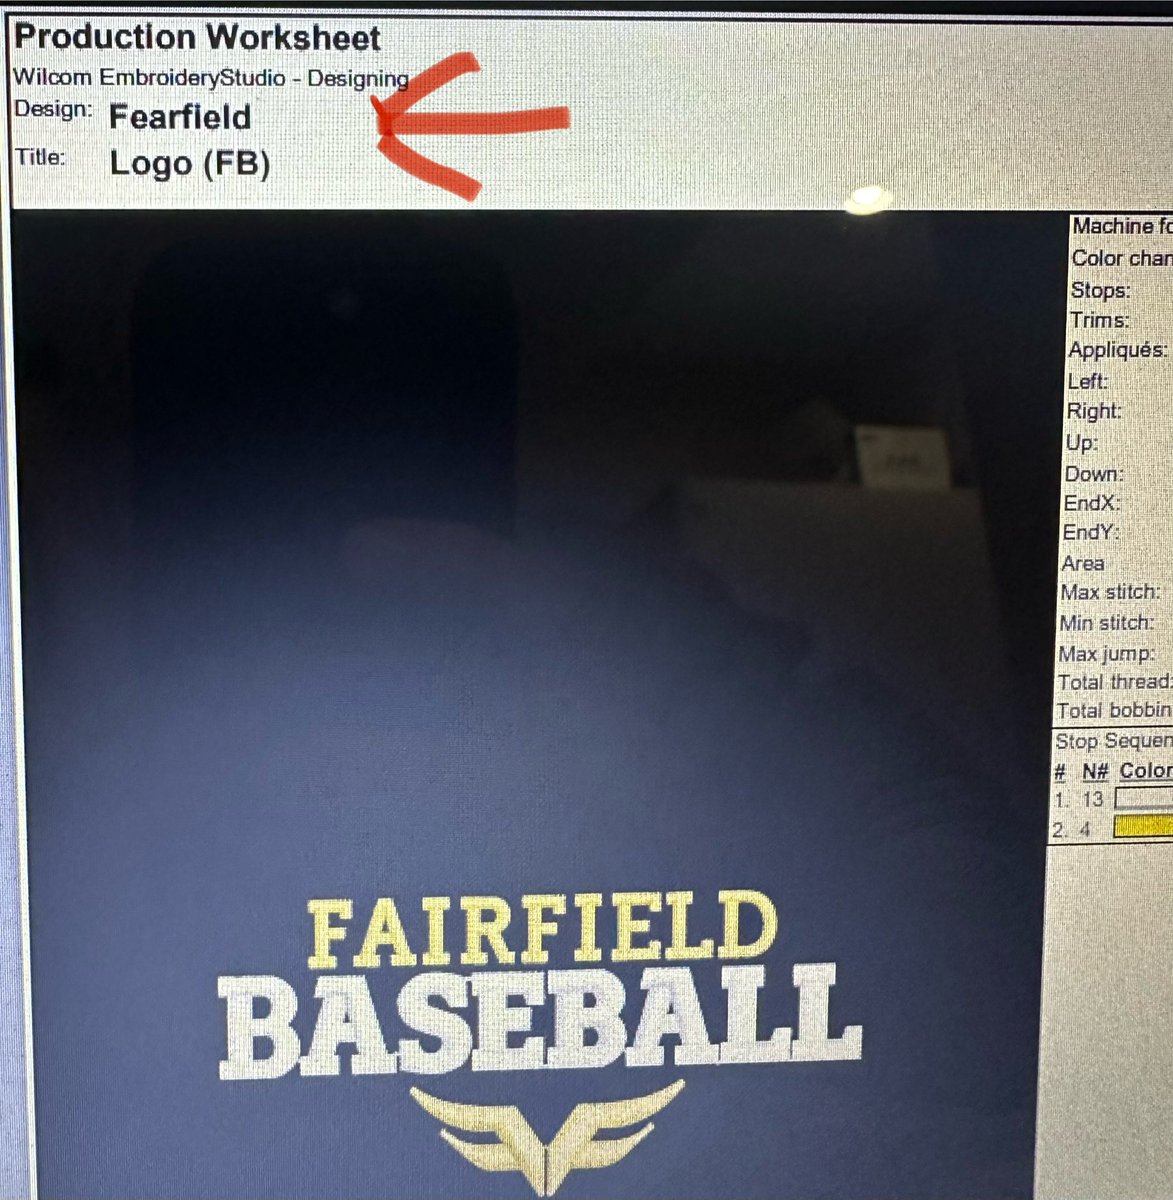 When your digitizer knows what’s up 🙌🏻 #FearThemOnTheField #FeartheField @FairfieldBaseb1